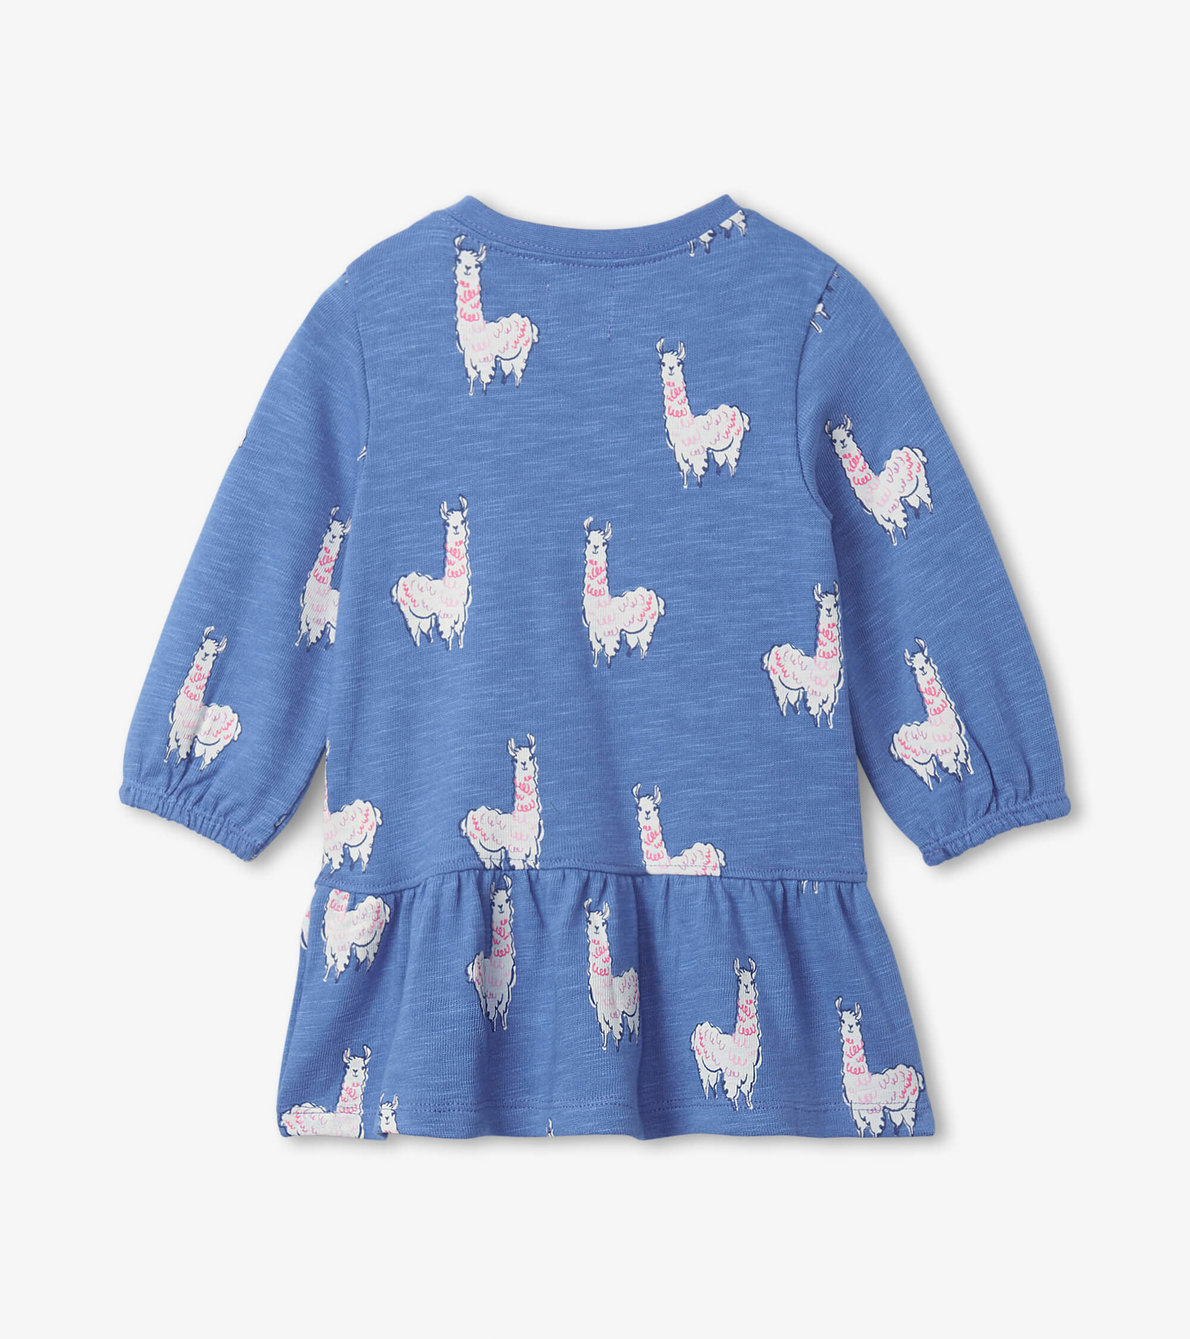 View larger image of Friendly Alpacas Baby Dress